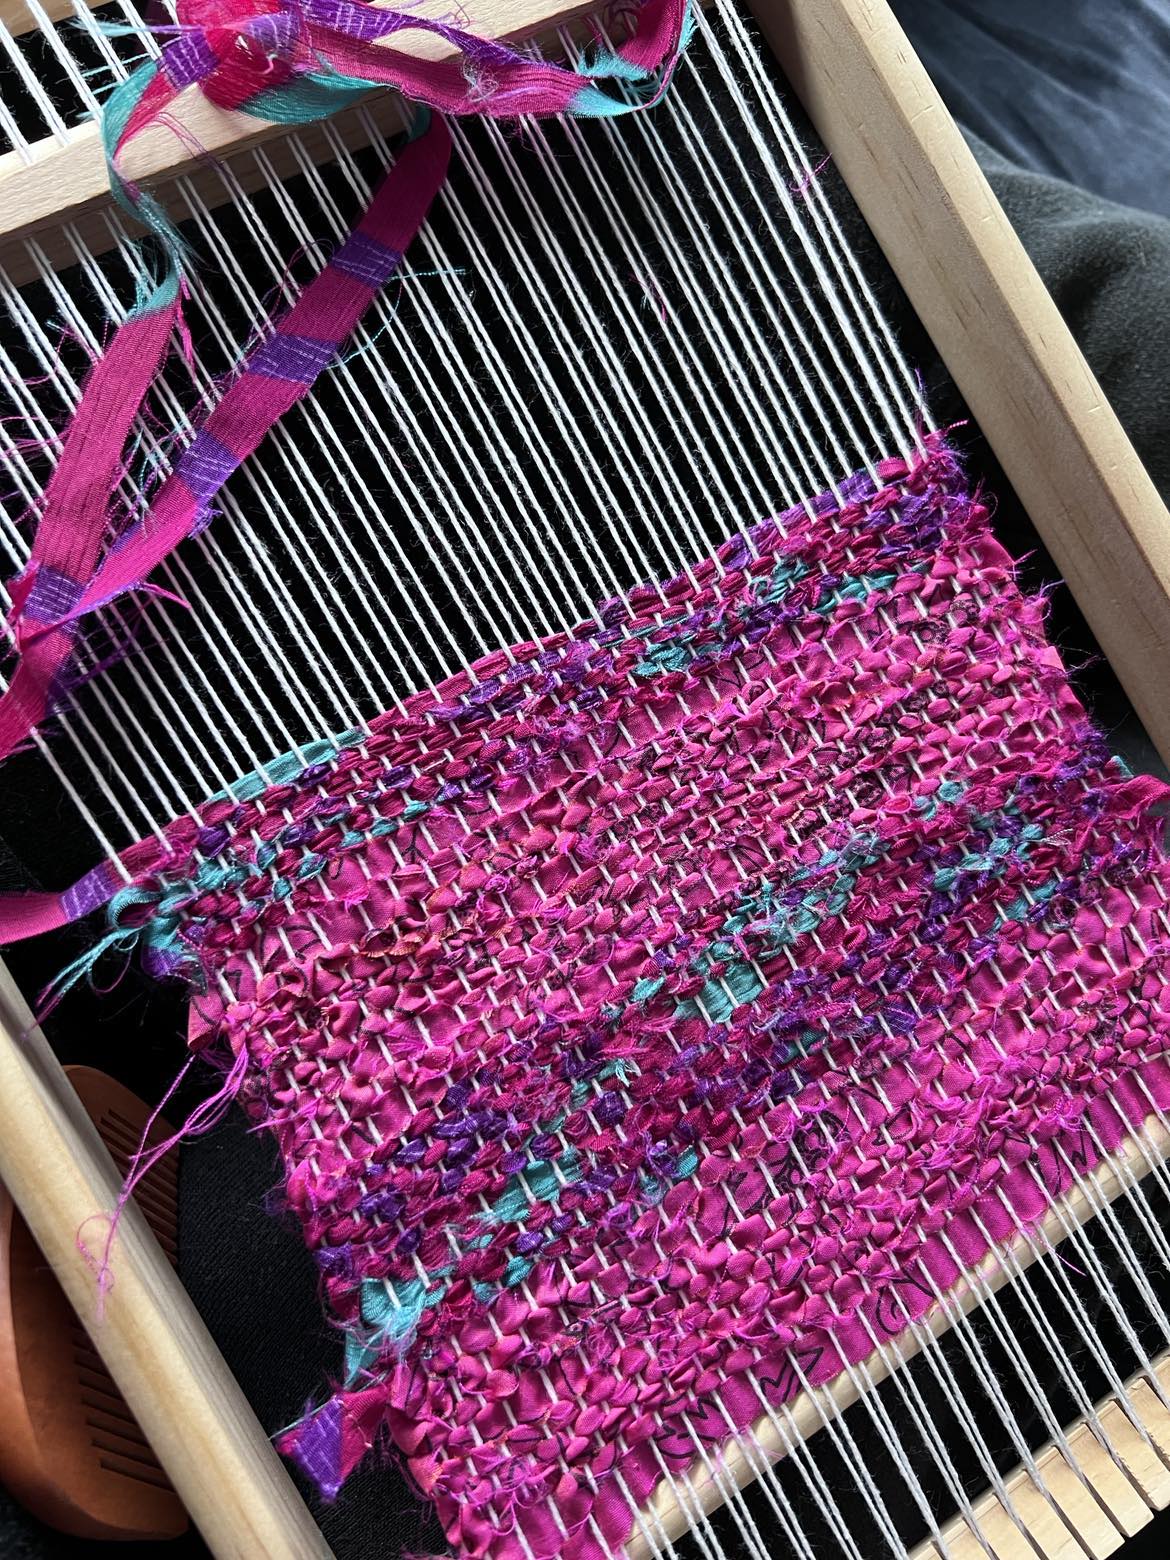 In-Process tapestry being woven on a small hand-loom. Pinks and Turquoise textiles.